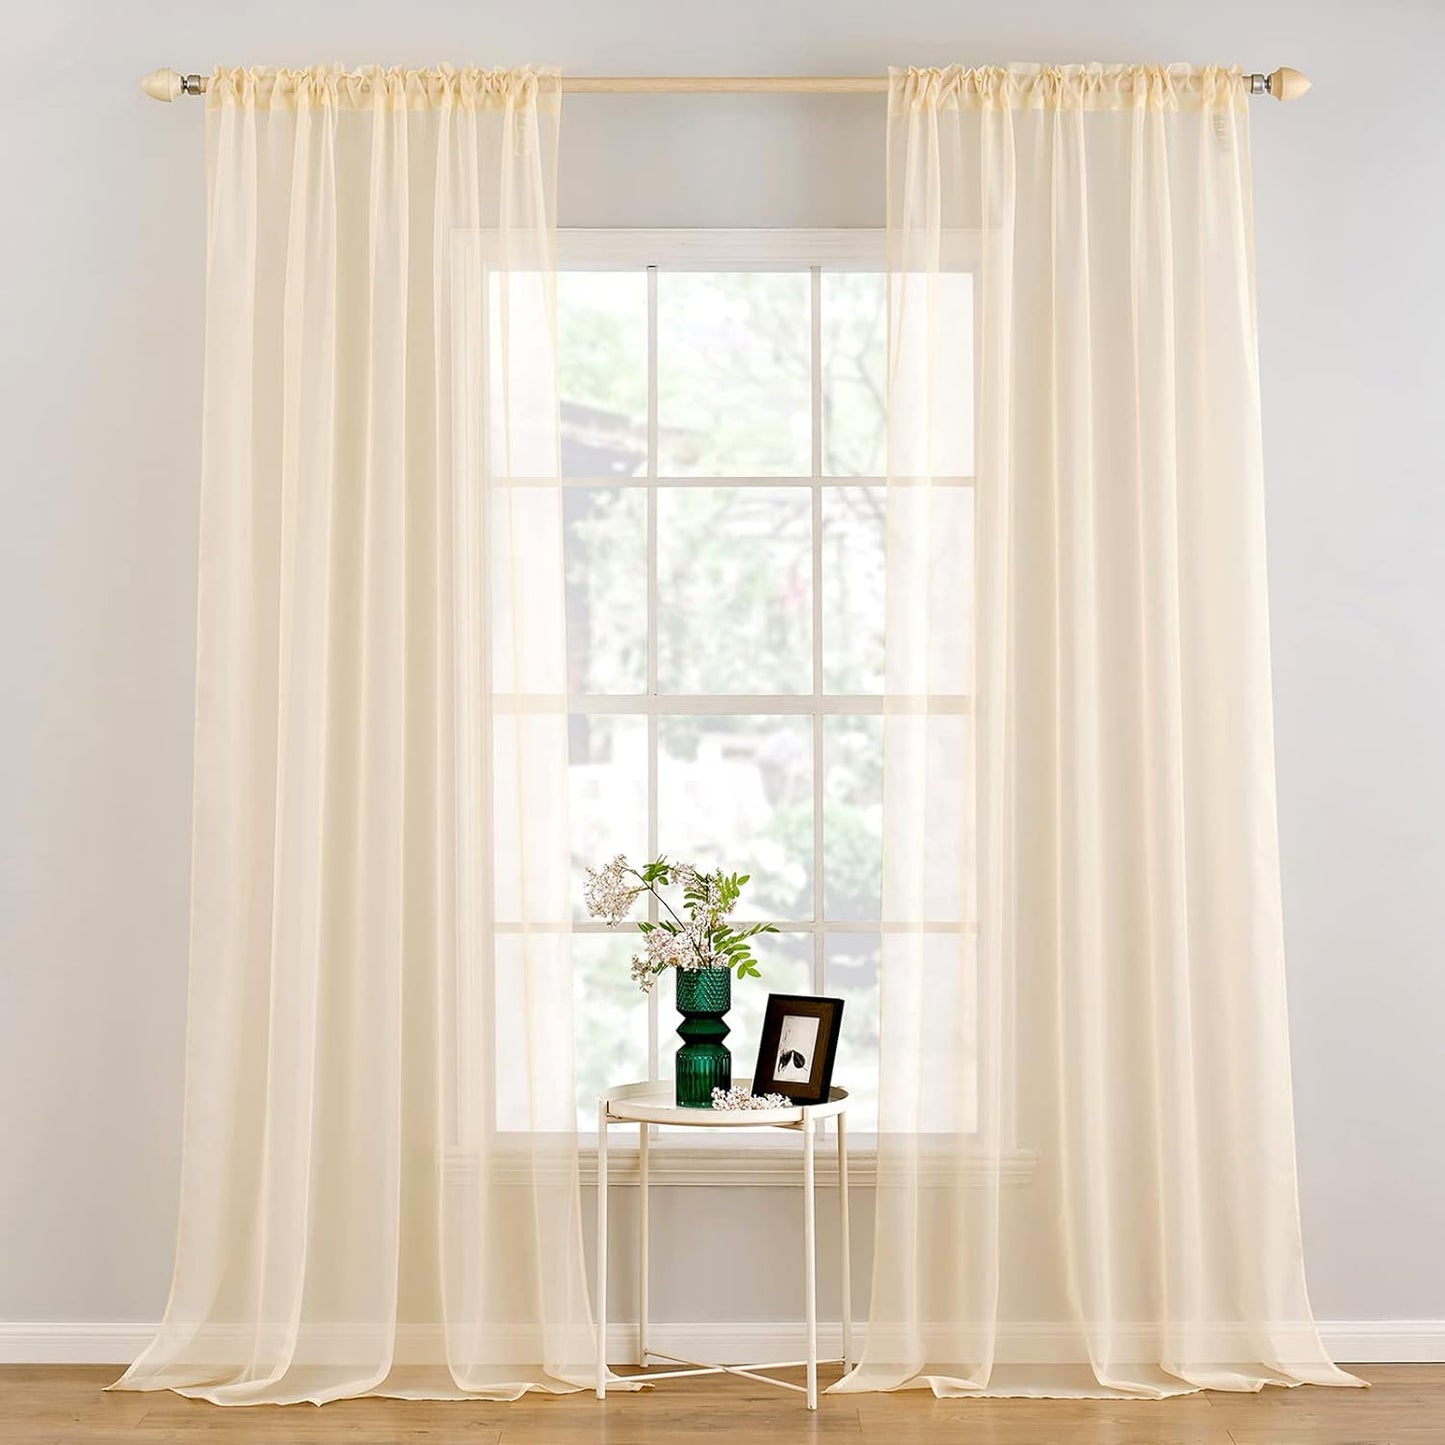 MIULEE White Sheer Curtains 96 Inches Long Window Curtains 2 Panels Solid Color Elegant Window Voile Panels/Drapes/Treatment for Bedroom Living Room (54 X 96 Inches White)  MIULEE Cream Beige 54''W X 120''L 